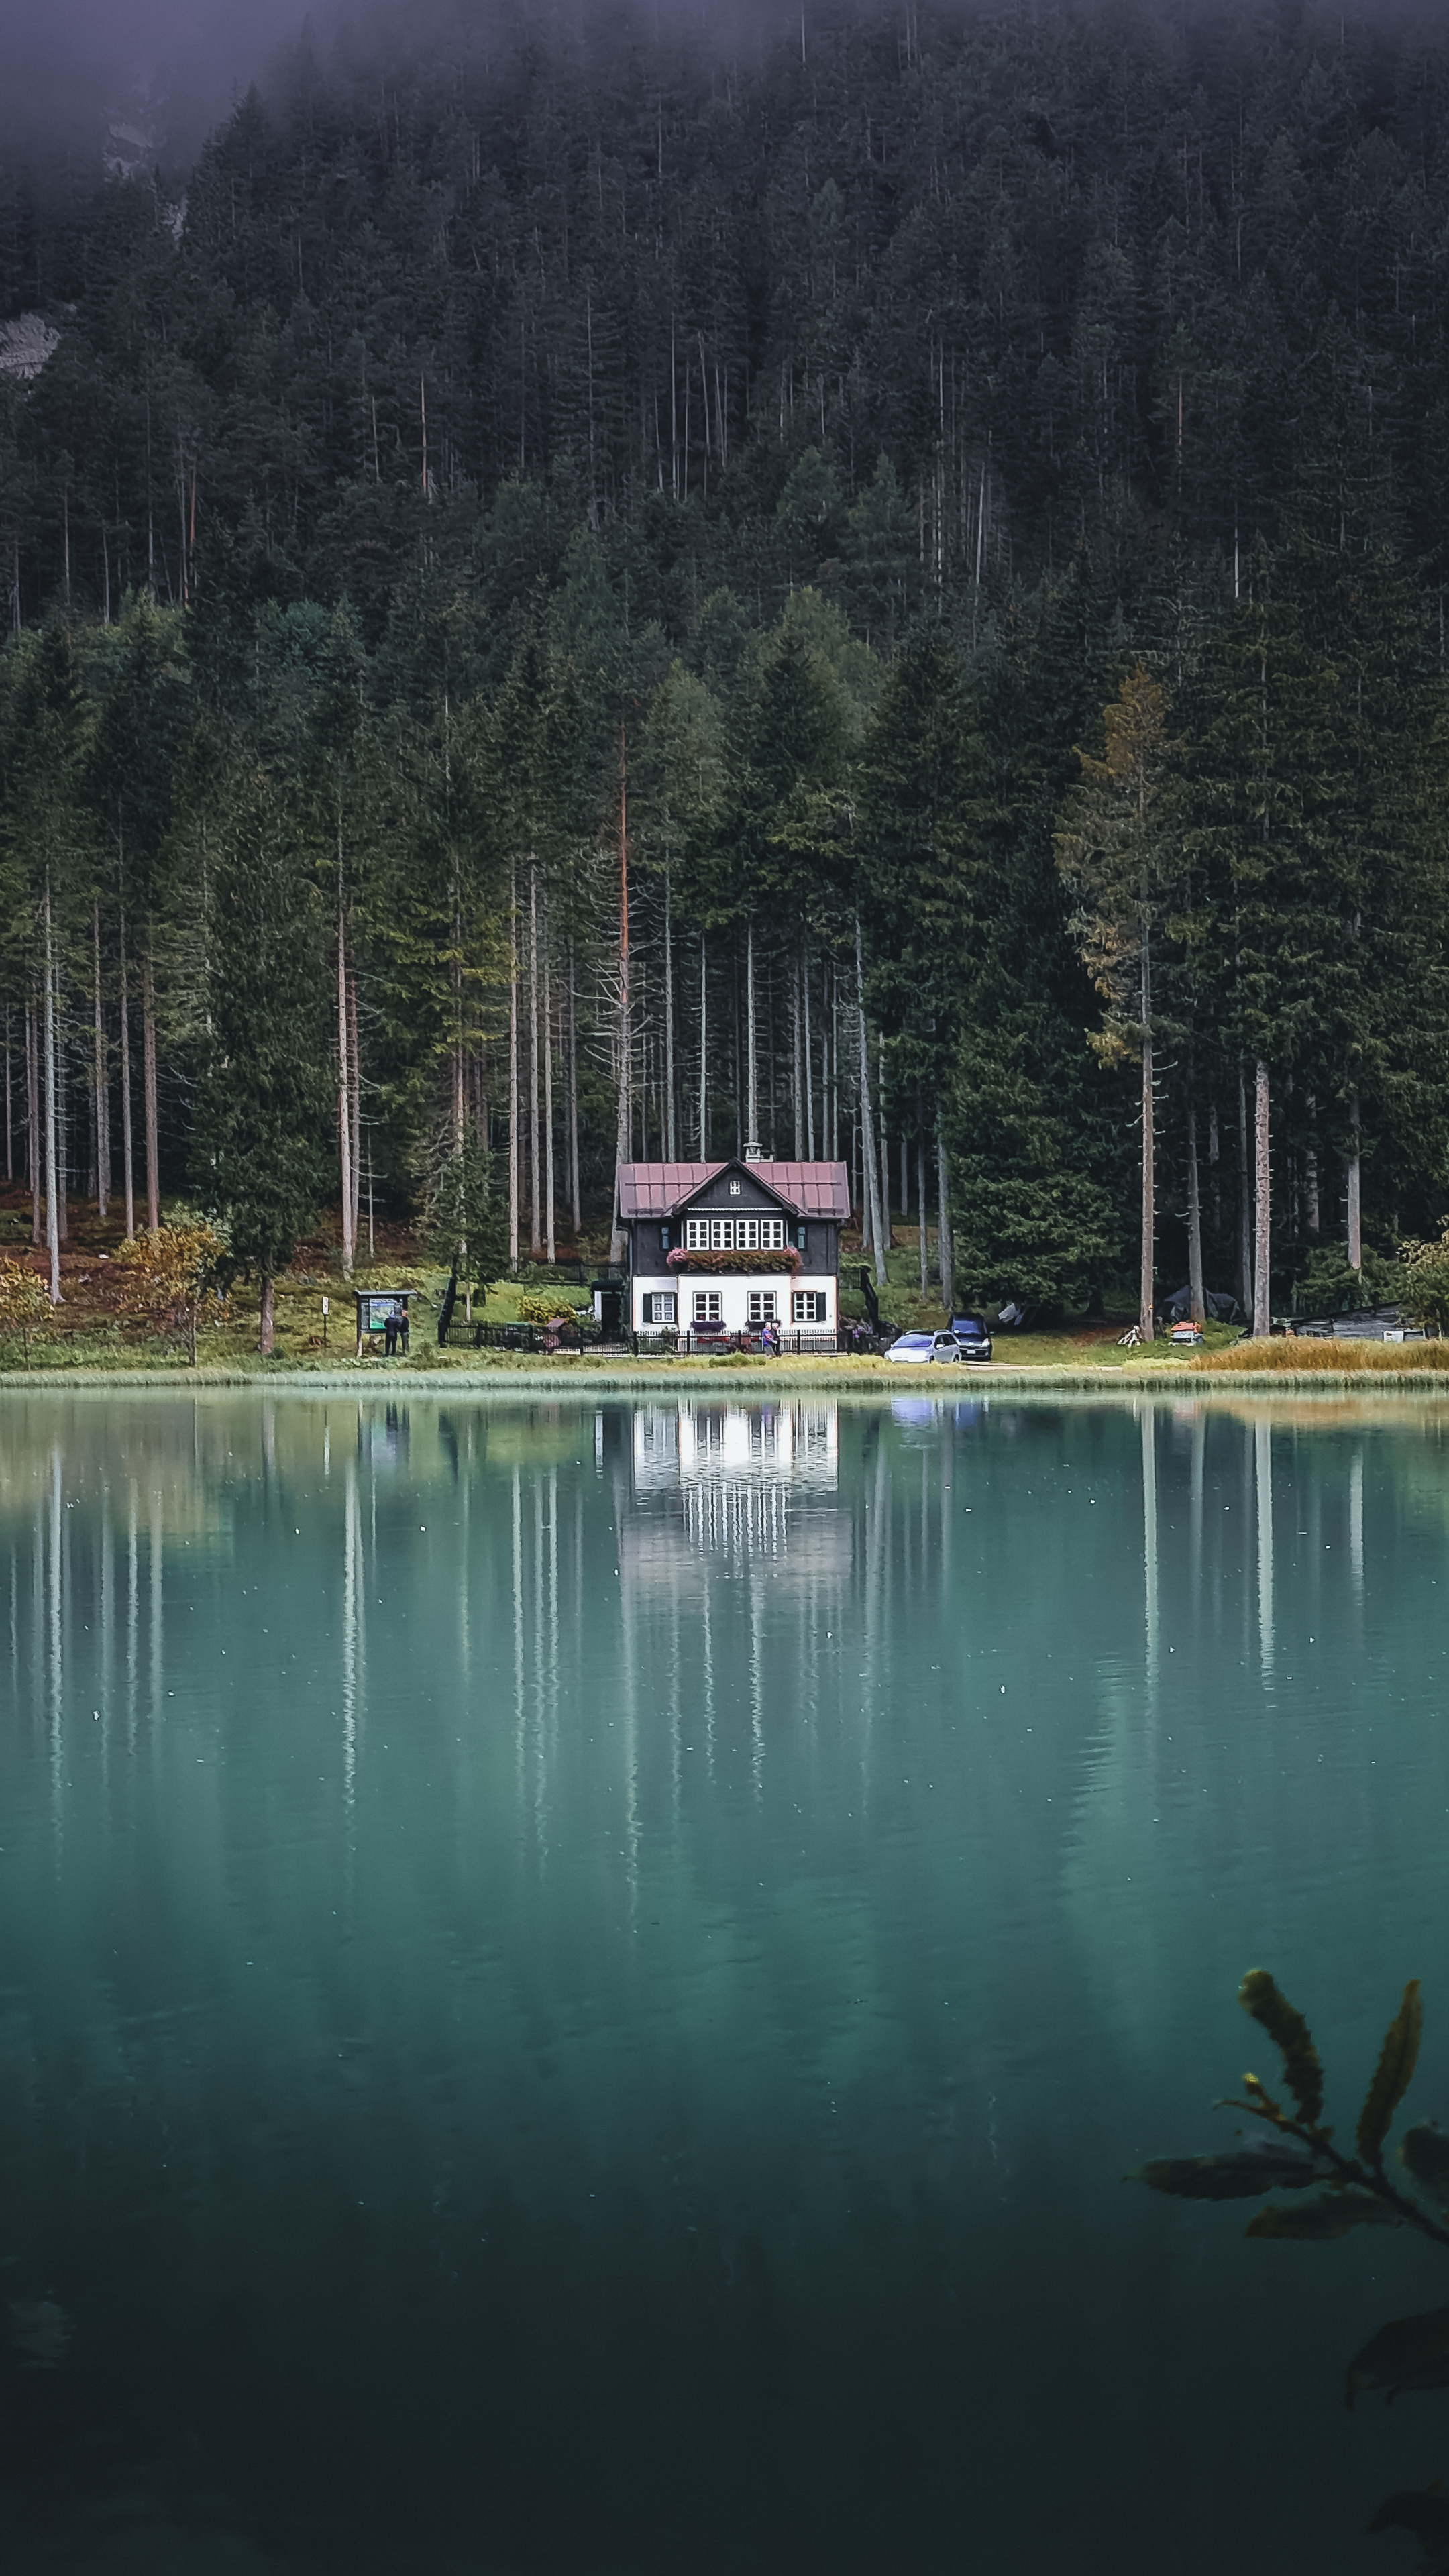 Country house, Lake shore, Serene nature, Tranquility captured, 2160x3840 4K Handy